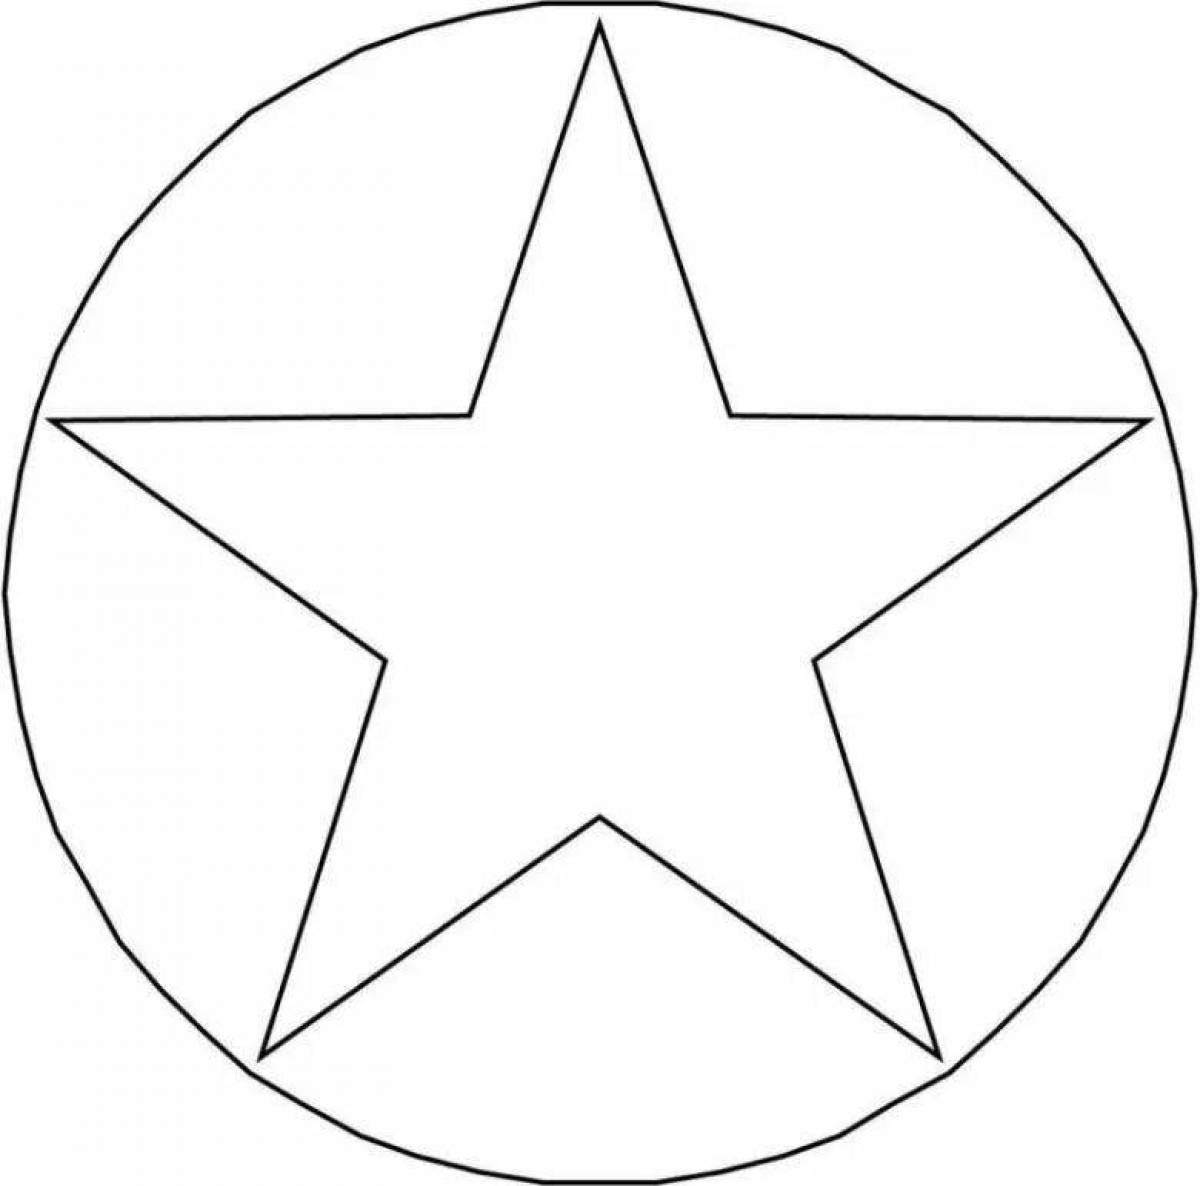 Five pointed star glamor coloring book